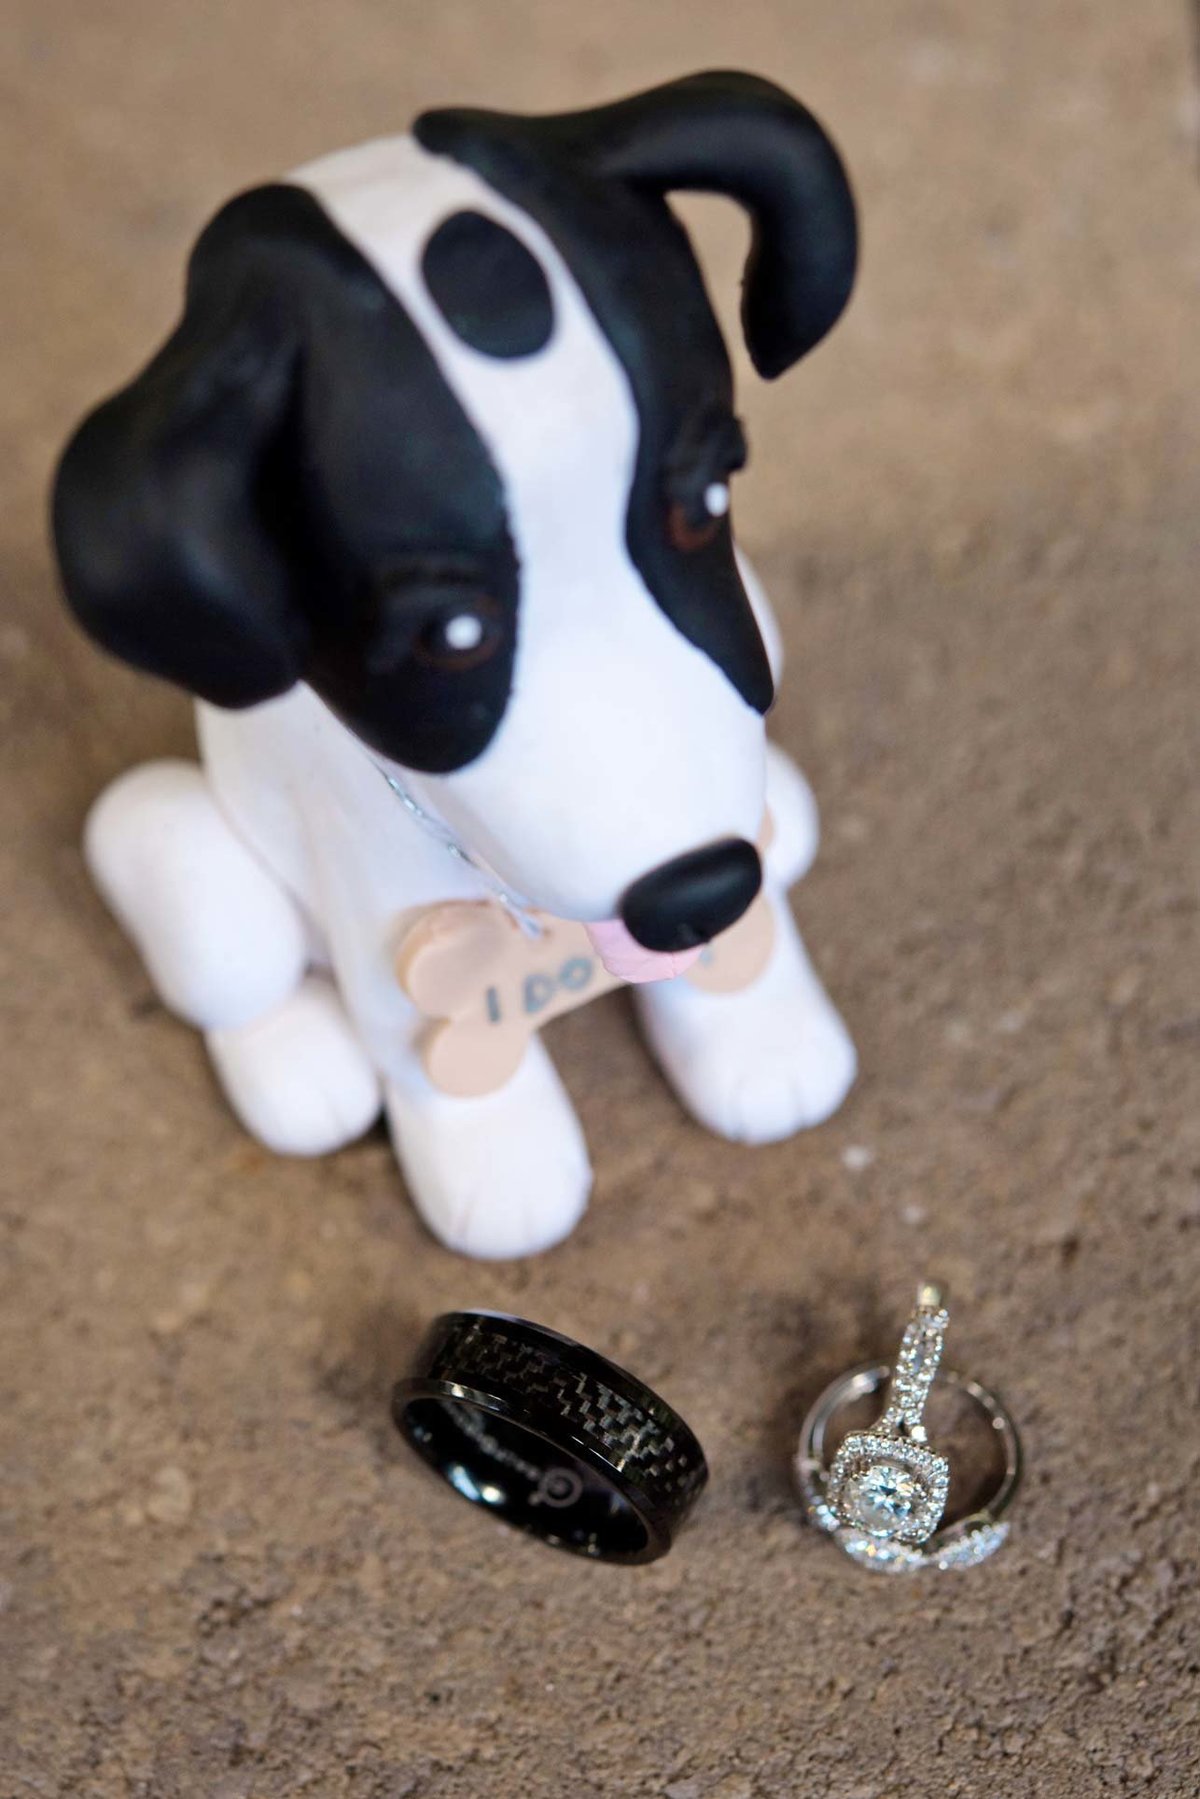 I do dog decoration with wedding bands and engagement ring at Flowerfield